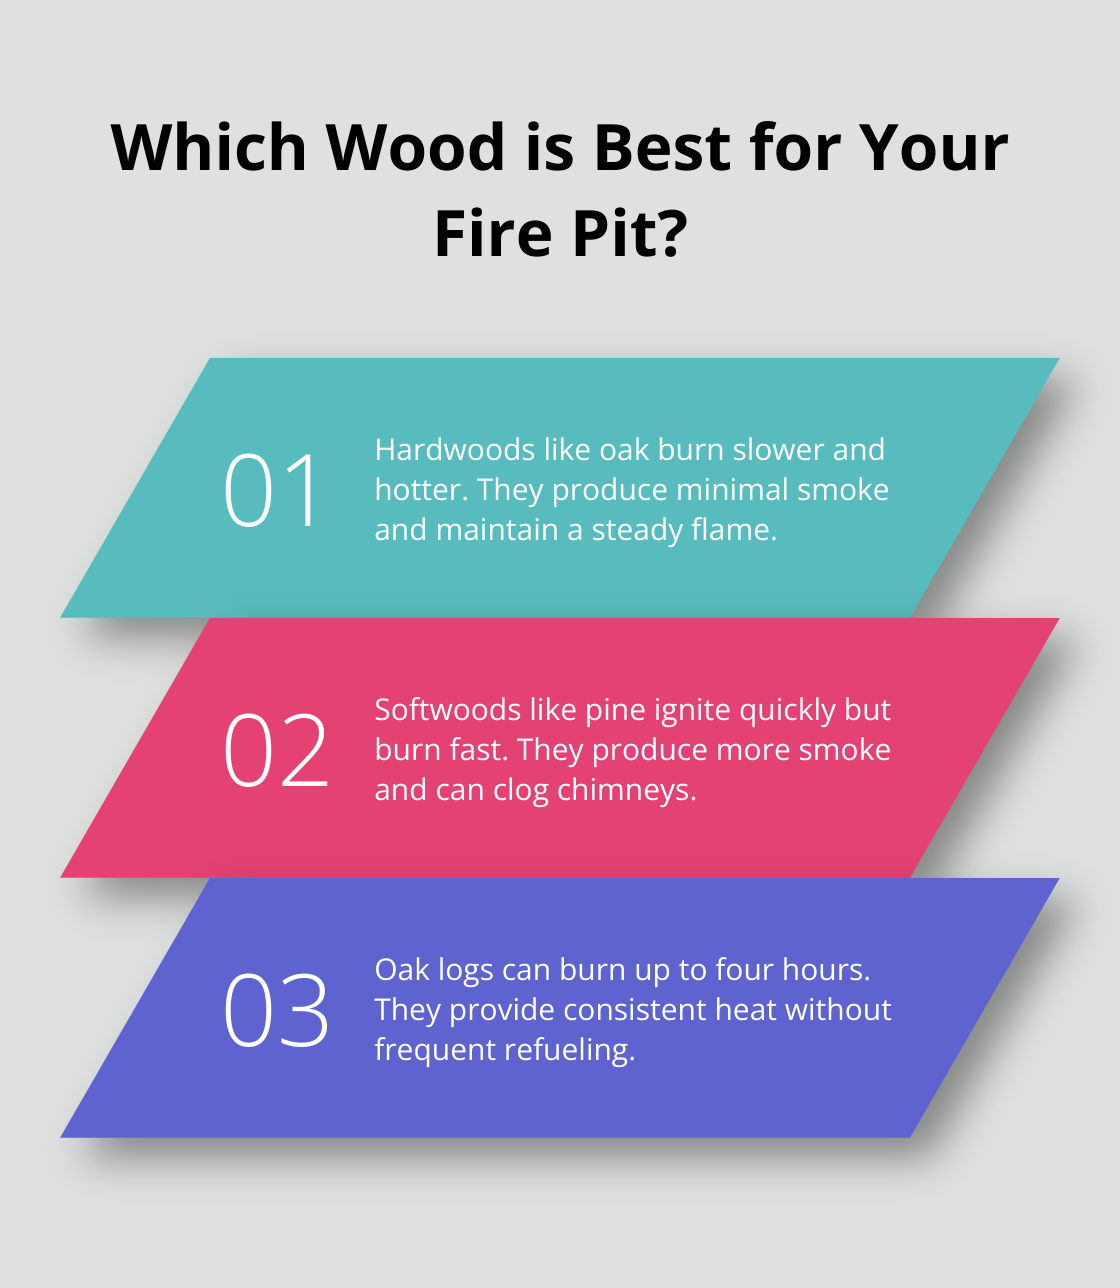 Fact - Which Wood is Best for Your Fire Pit?